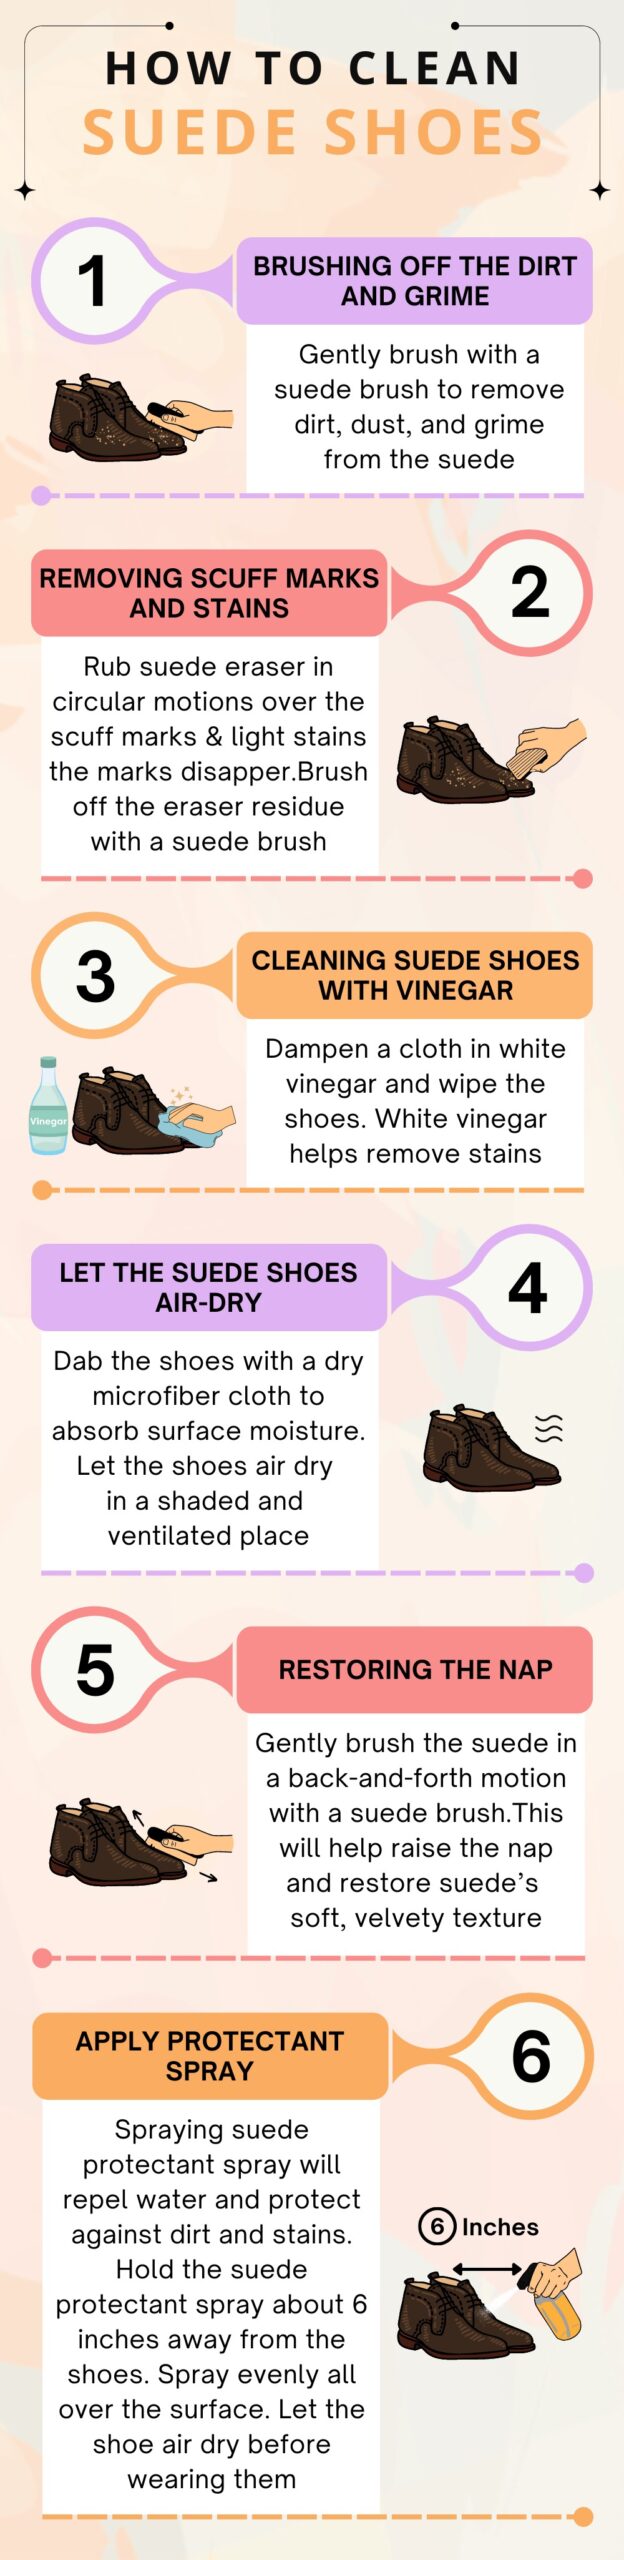 How to Clean Suede Shoes - Tested Methods That Work